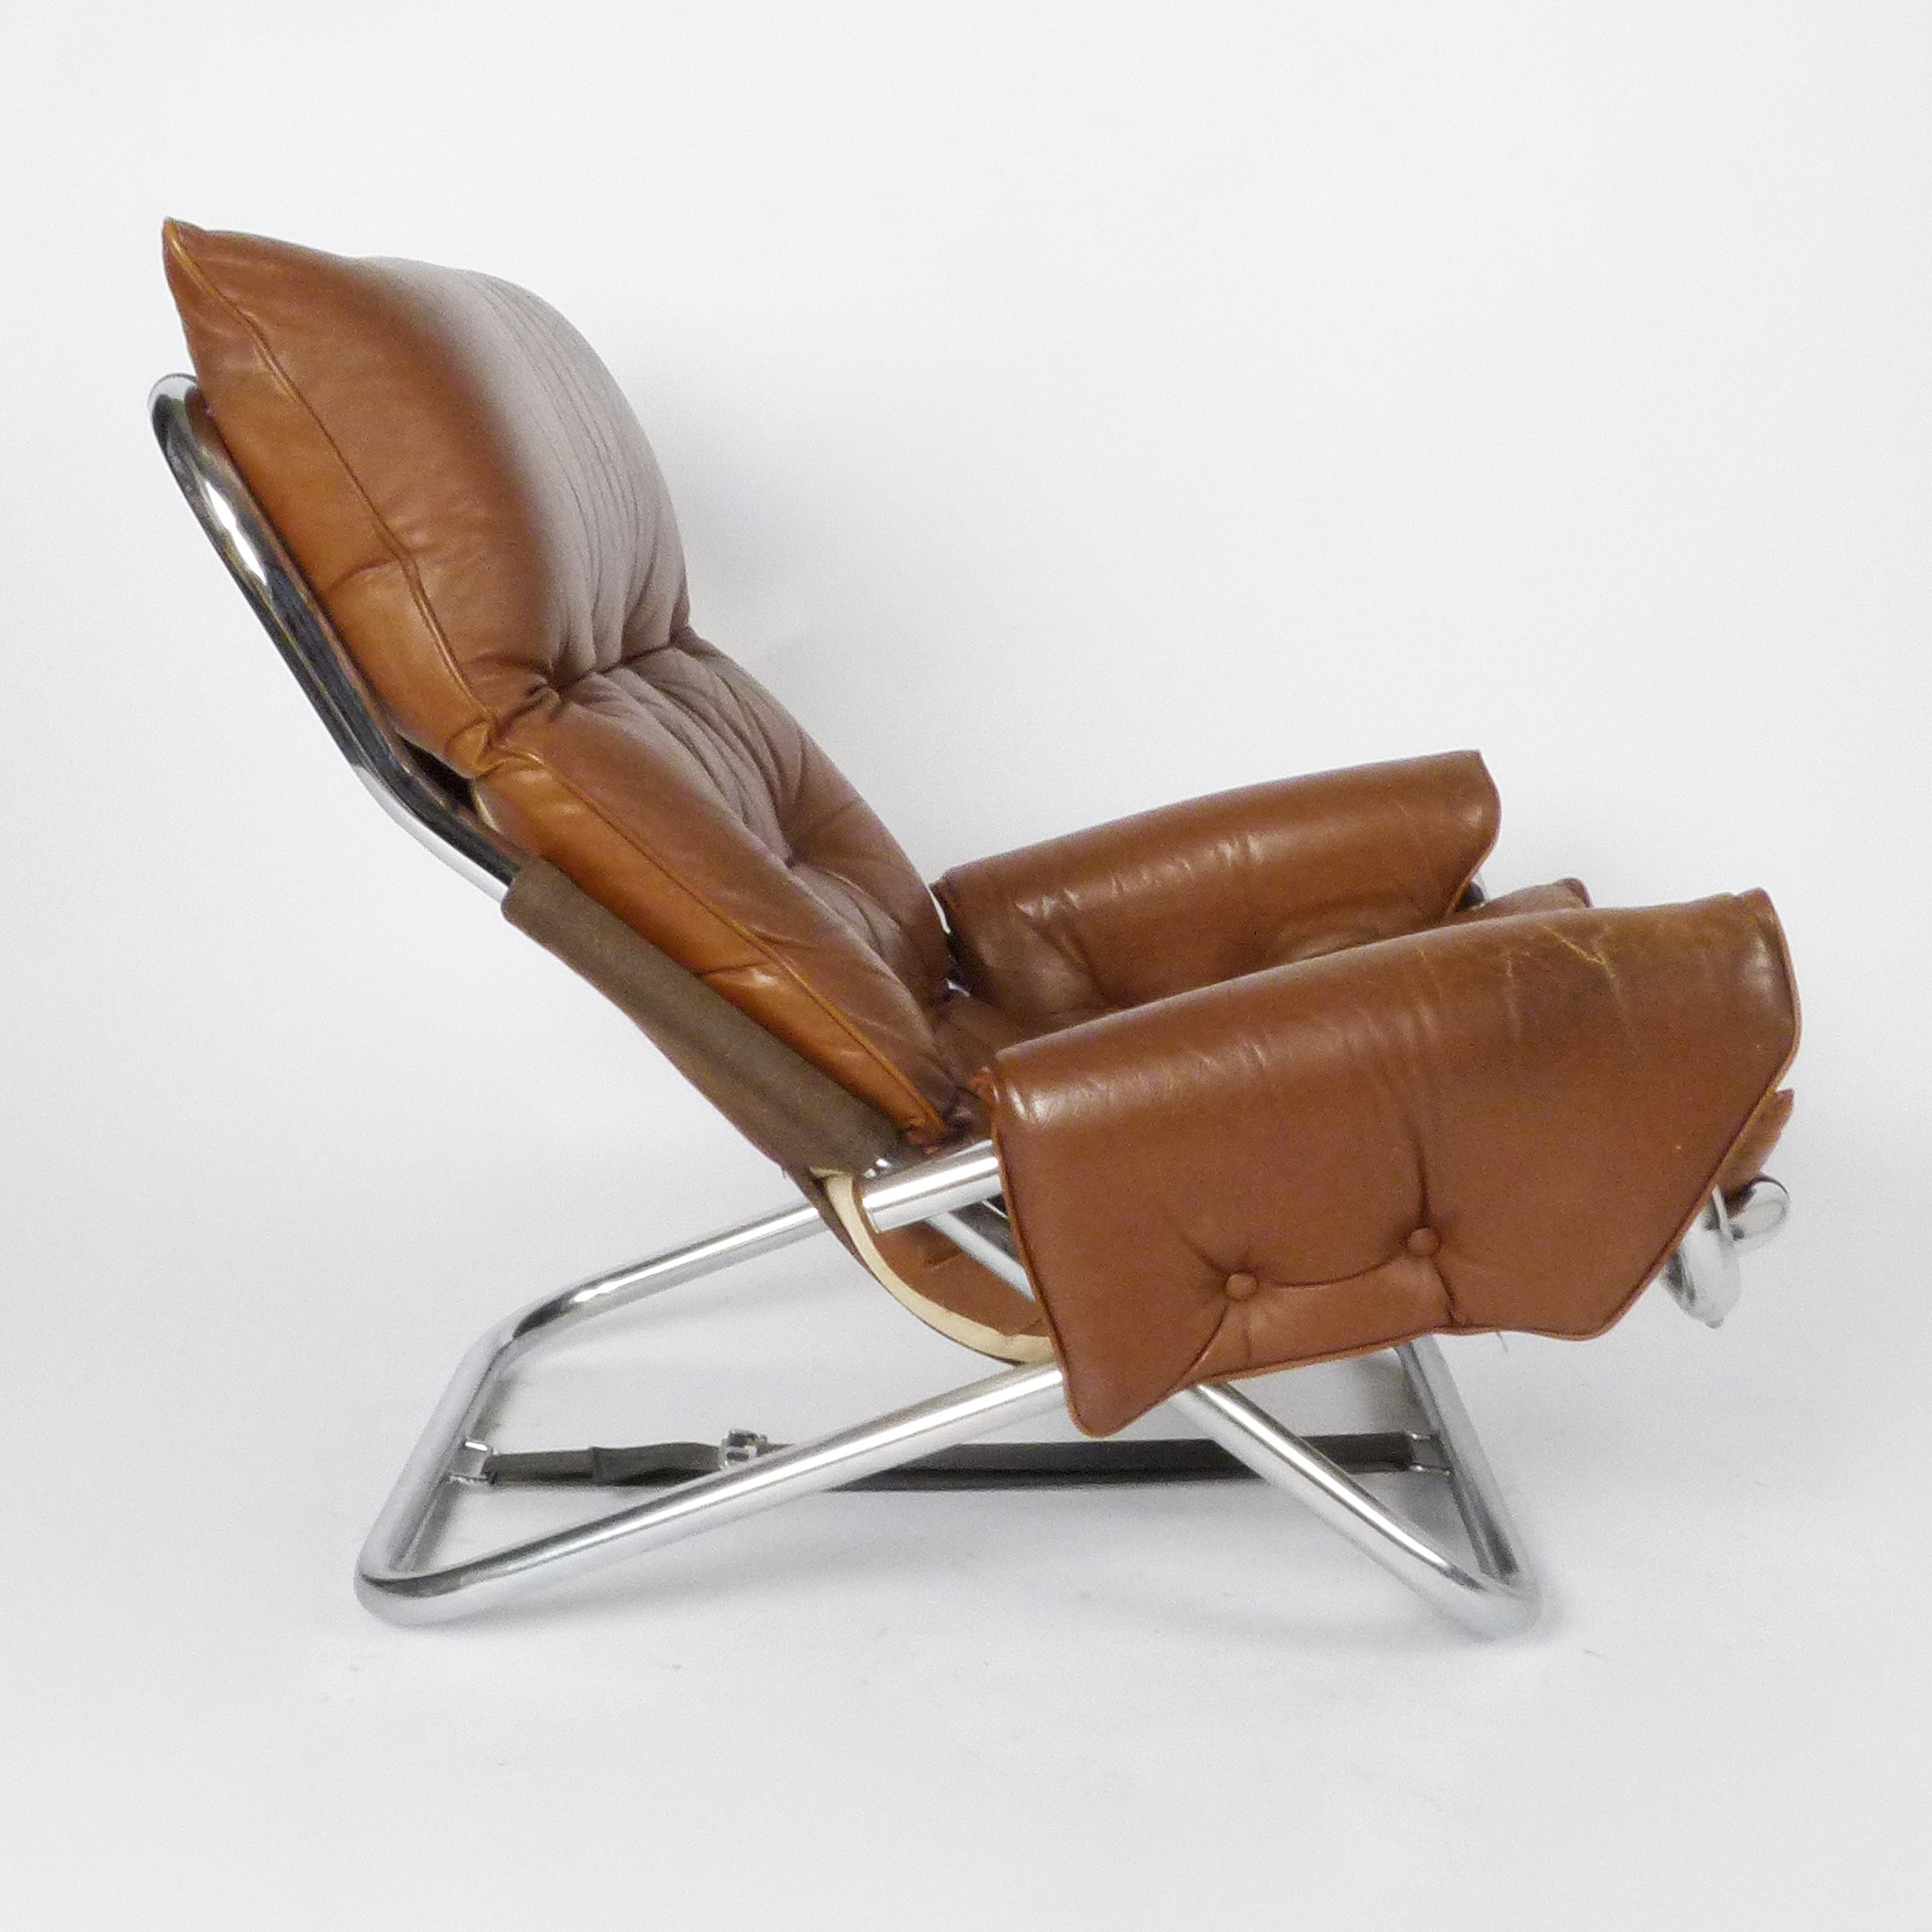 Leather chrome lounge chair ottoman sold 18 at city